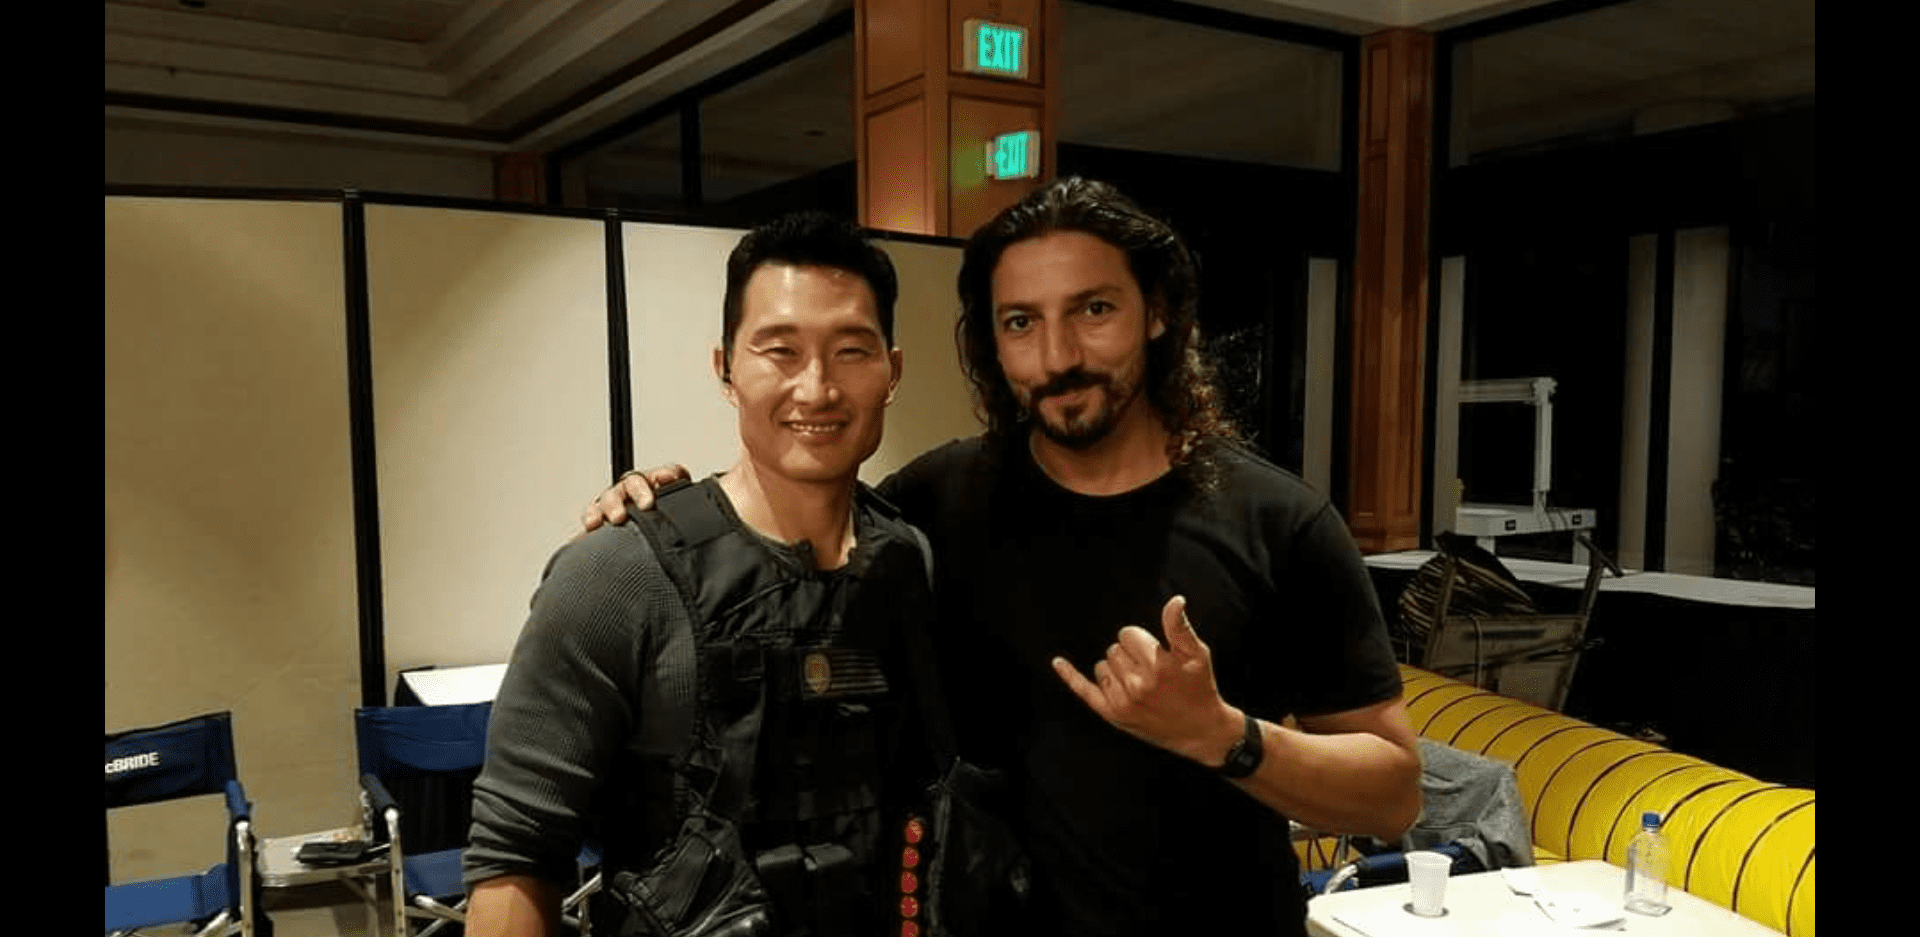 Daniel Dae Kim and Solimane Lamouri on the set of "Hawaii Five-O" on March 15, 2017 | Photo: Flickr/Solsol1971